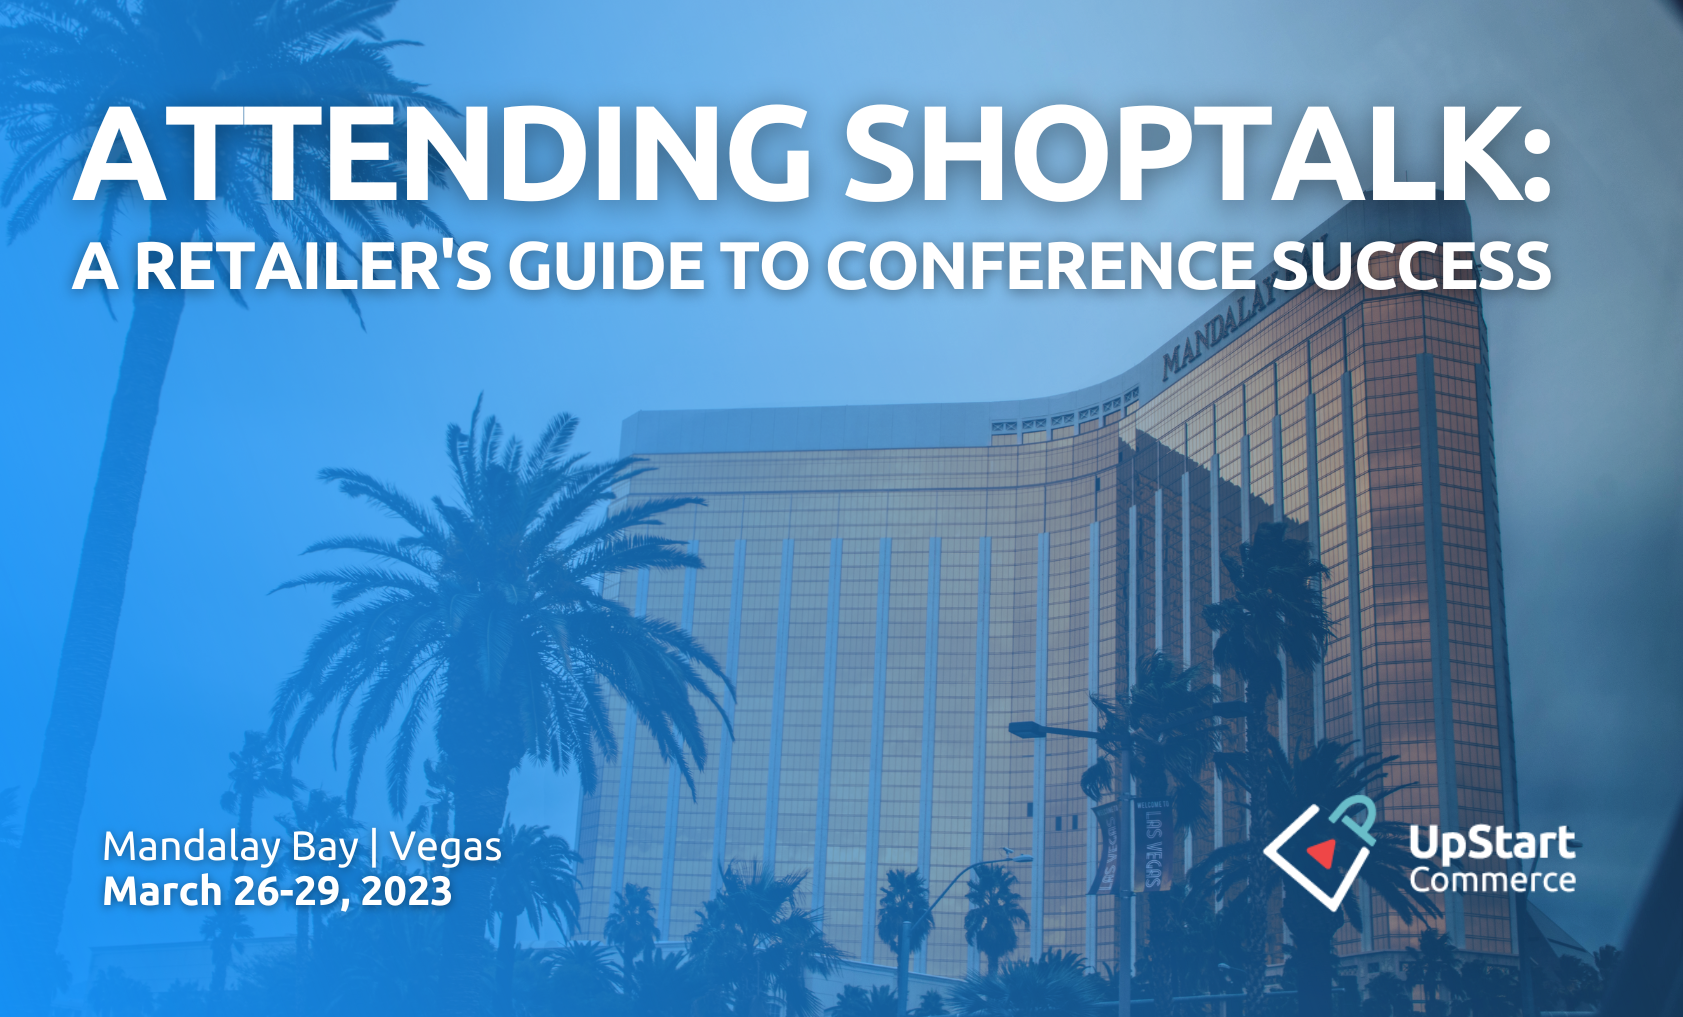 Attending Shoptalk for Retailers, with a blue gradient photo of Mandalay Bay